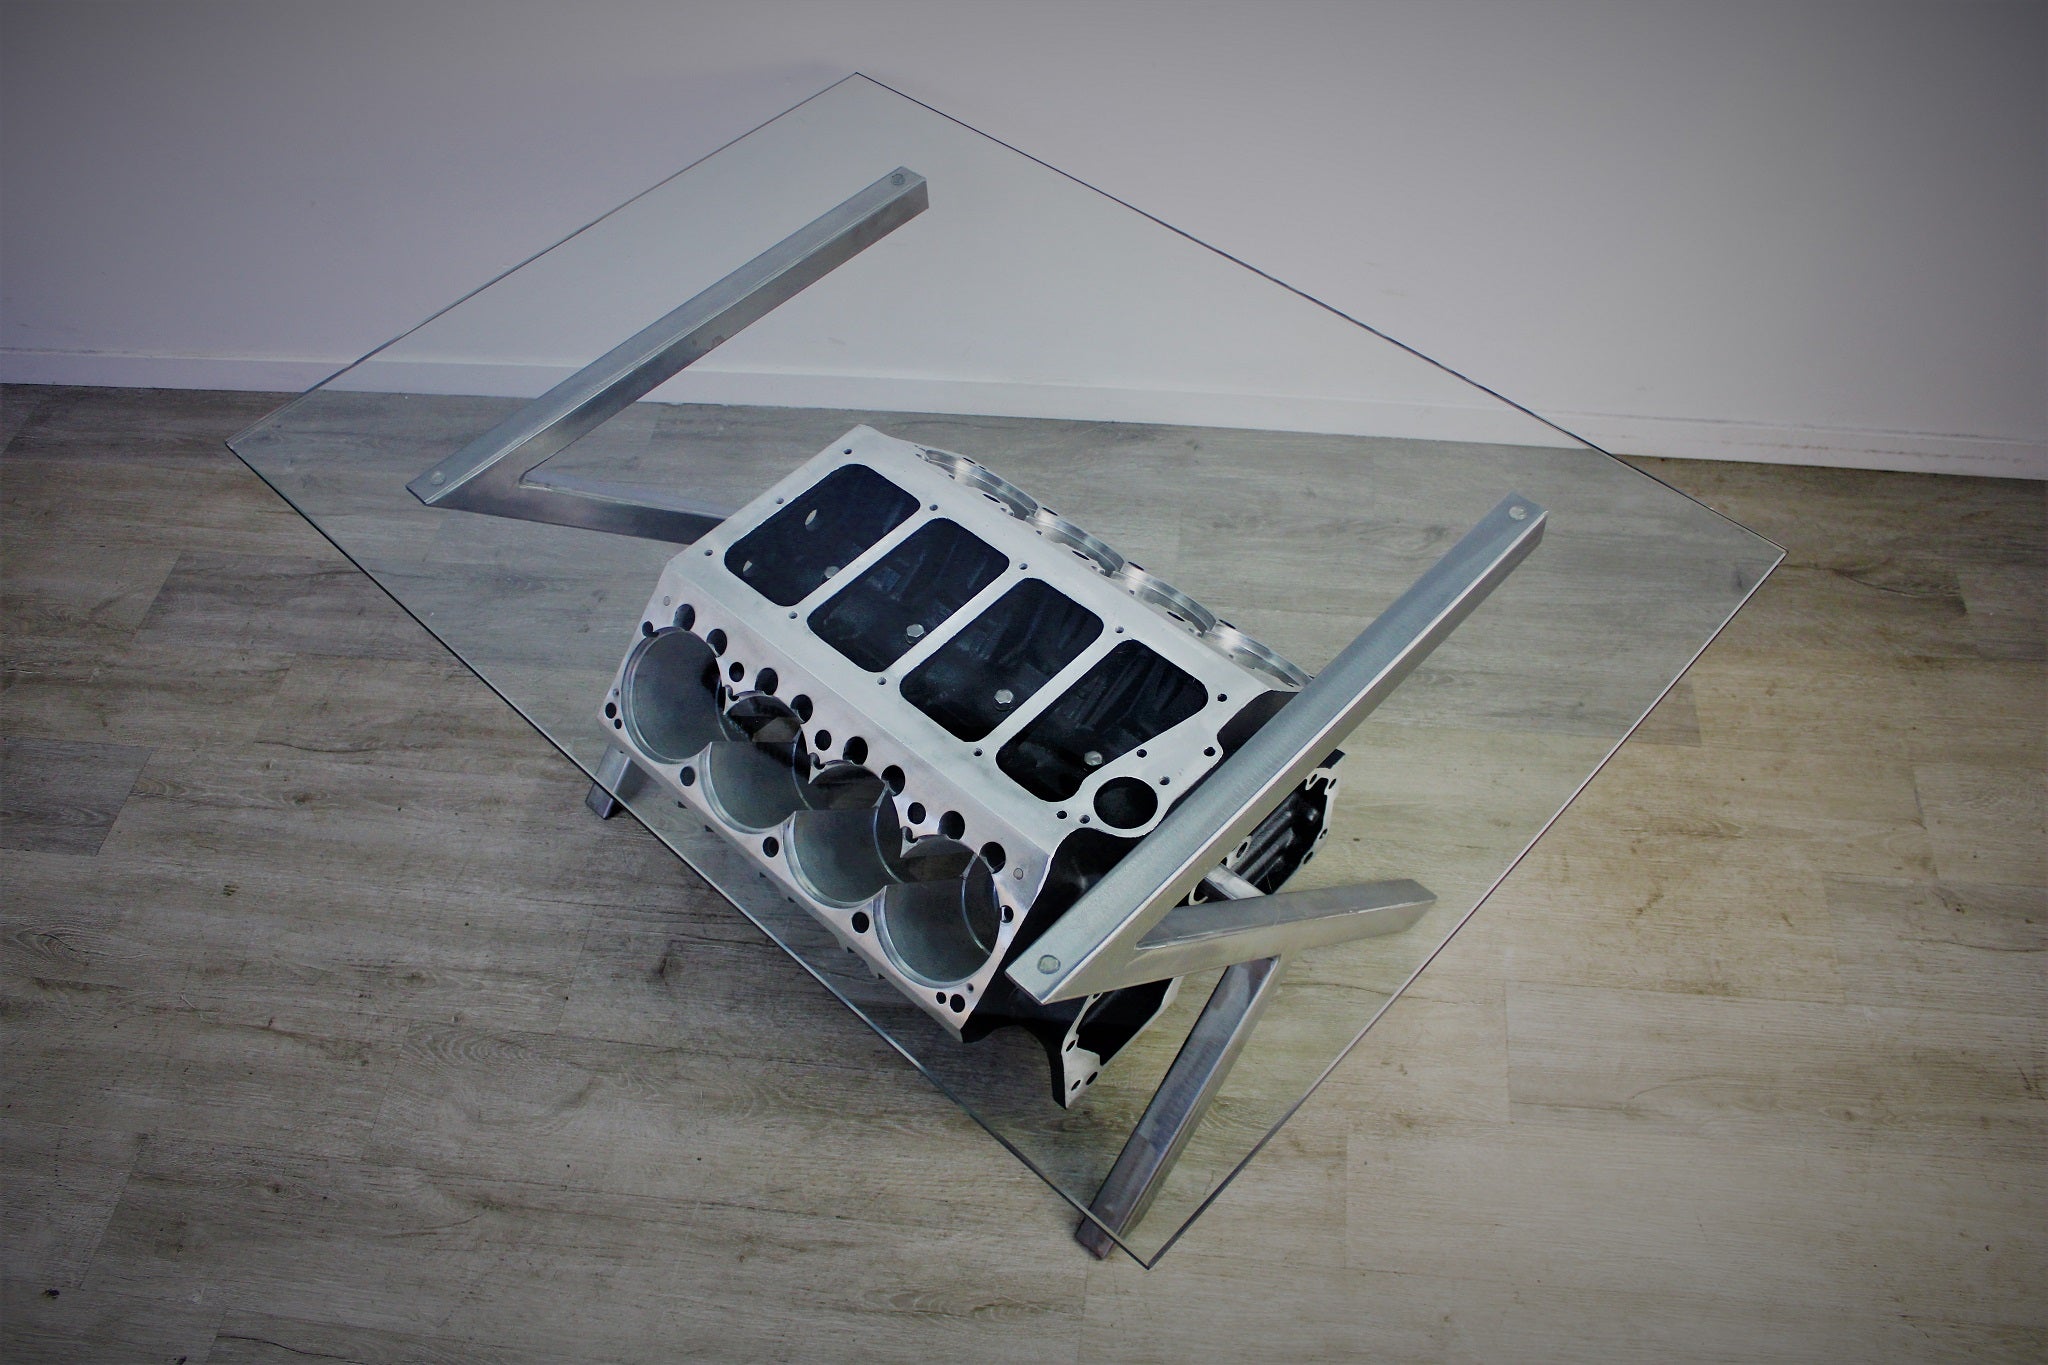 Birds-eye view of a Top Fuel aluminum engine block coffee table finished in black and silver with a rectangular glass top.